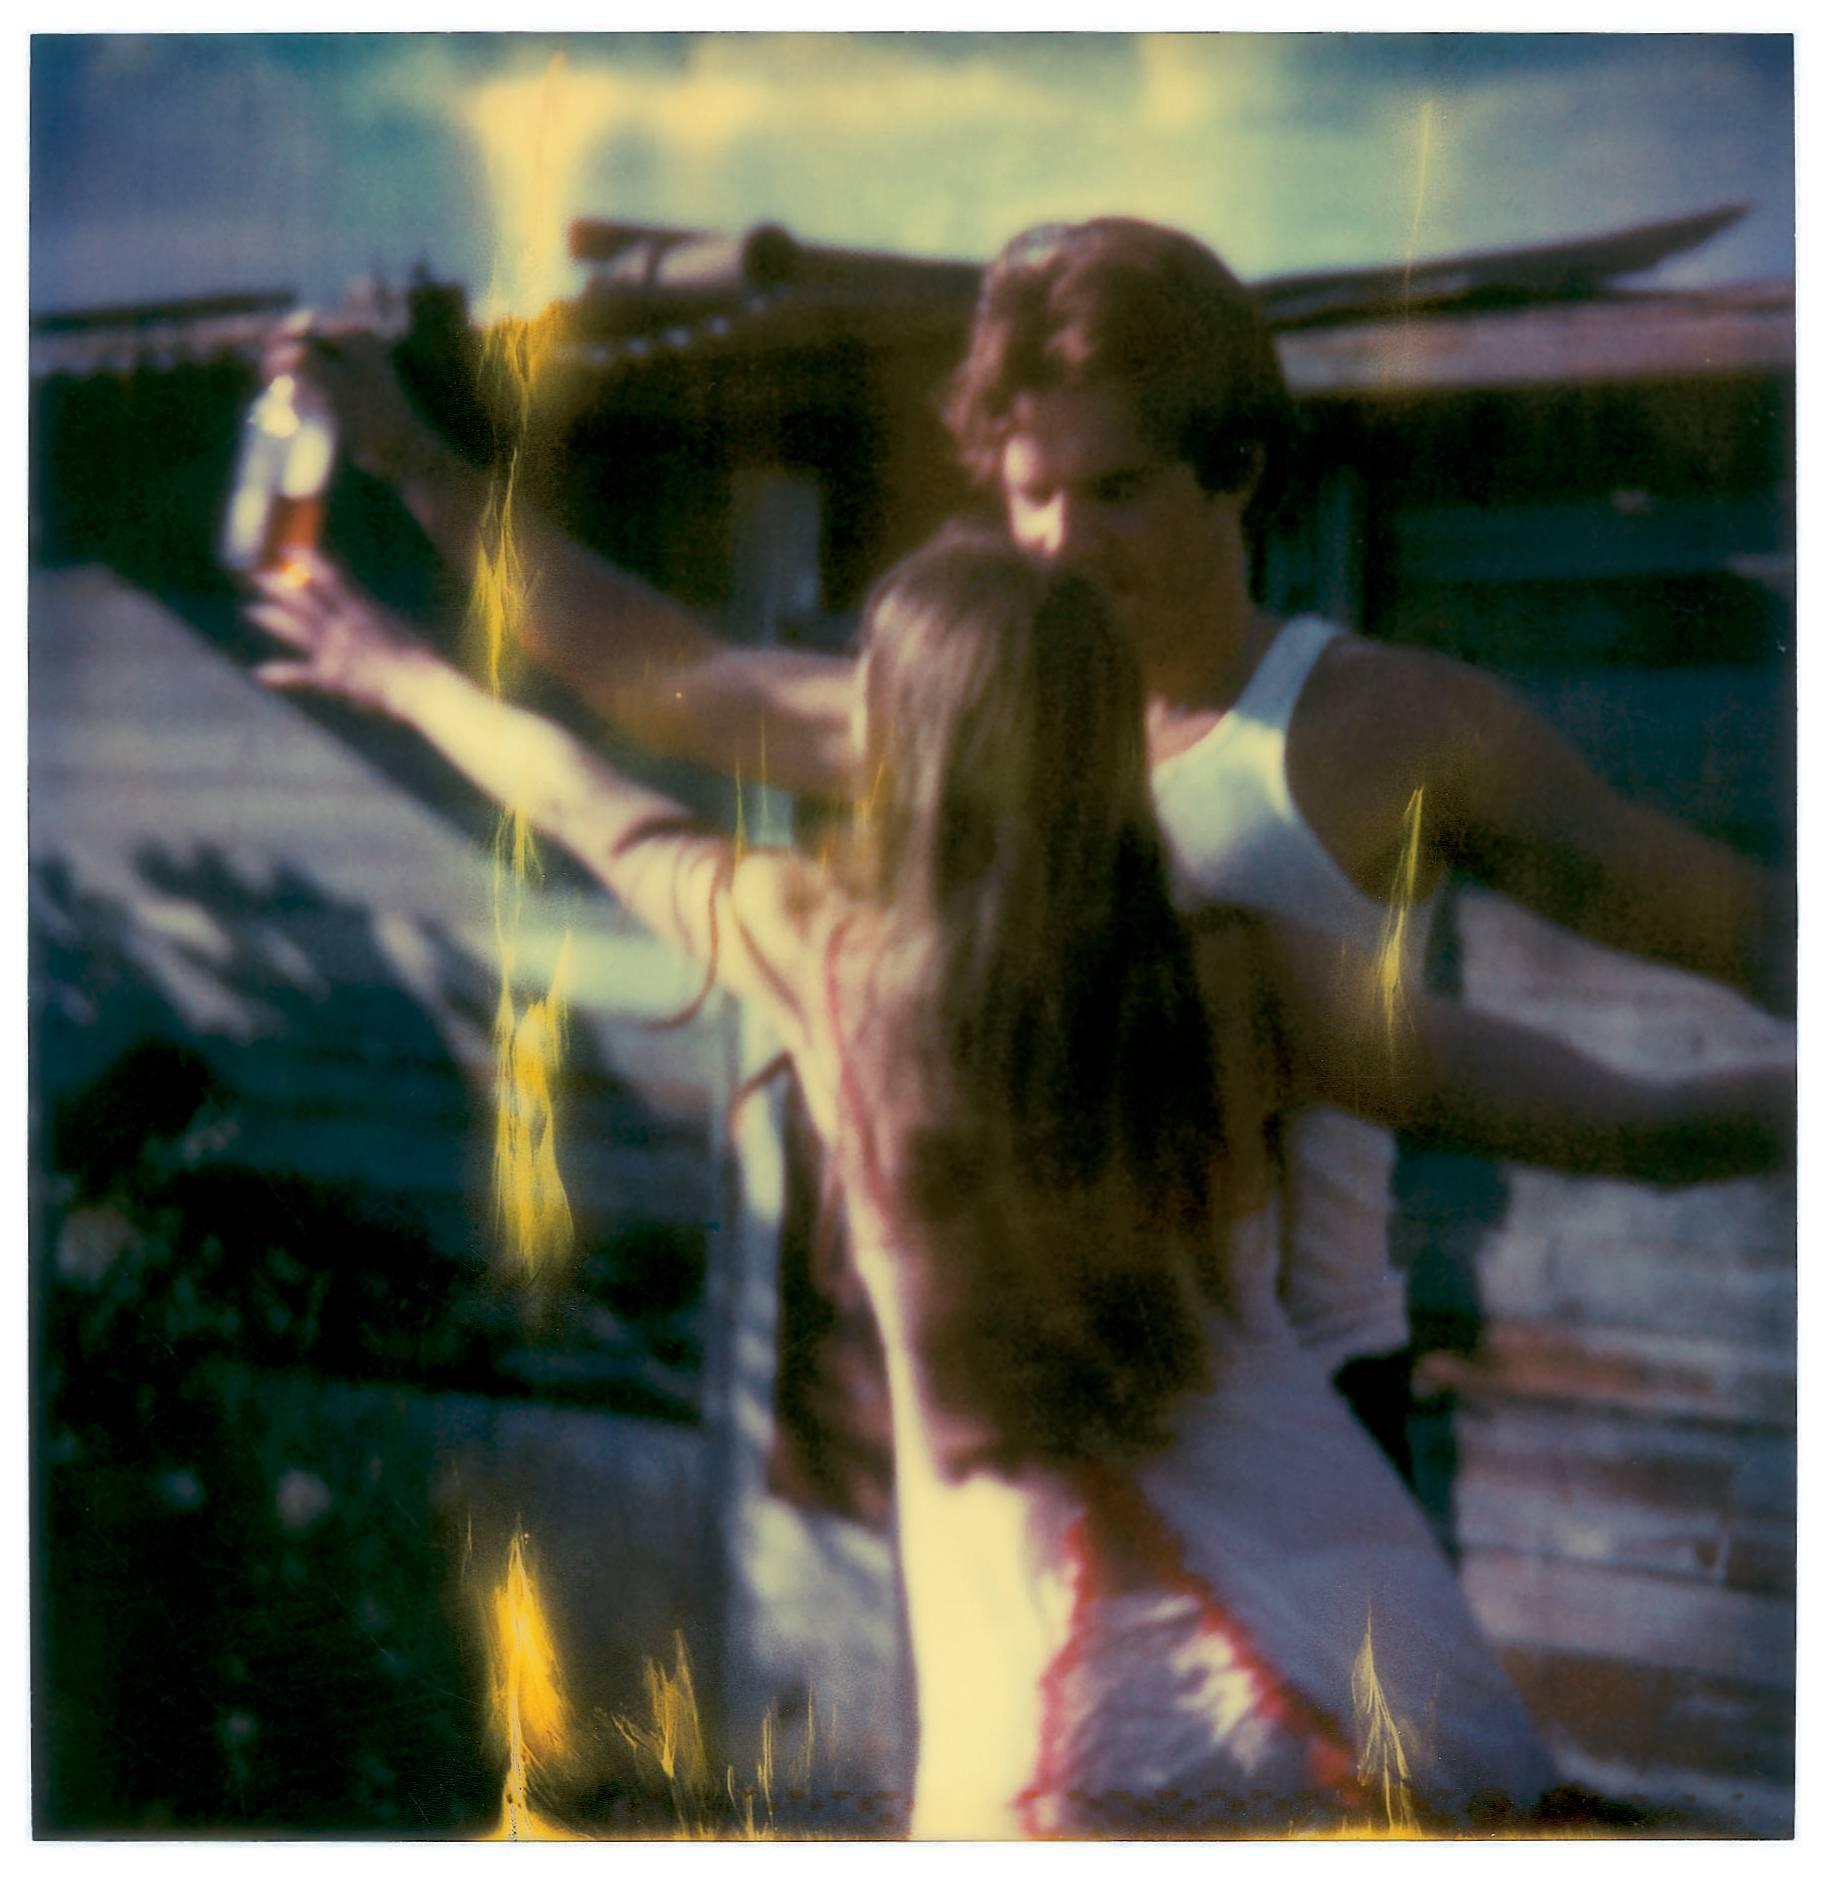 Whisky Dance I (Sidewinder) - 2005

Edition 5/10, 
8 pieces installed including gaps 172x,338cm, 82x80cm each. 

8 analog C-Prints, hand-printed by the artist, on Fuji Crystal Archive Paper, matte surface, based on the 8 original Polaroids. 
Mounted